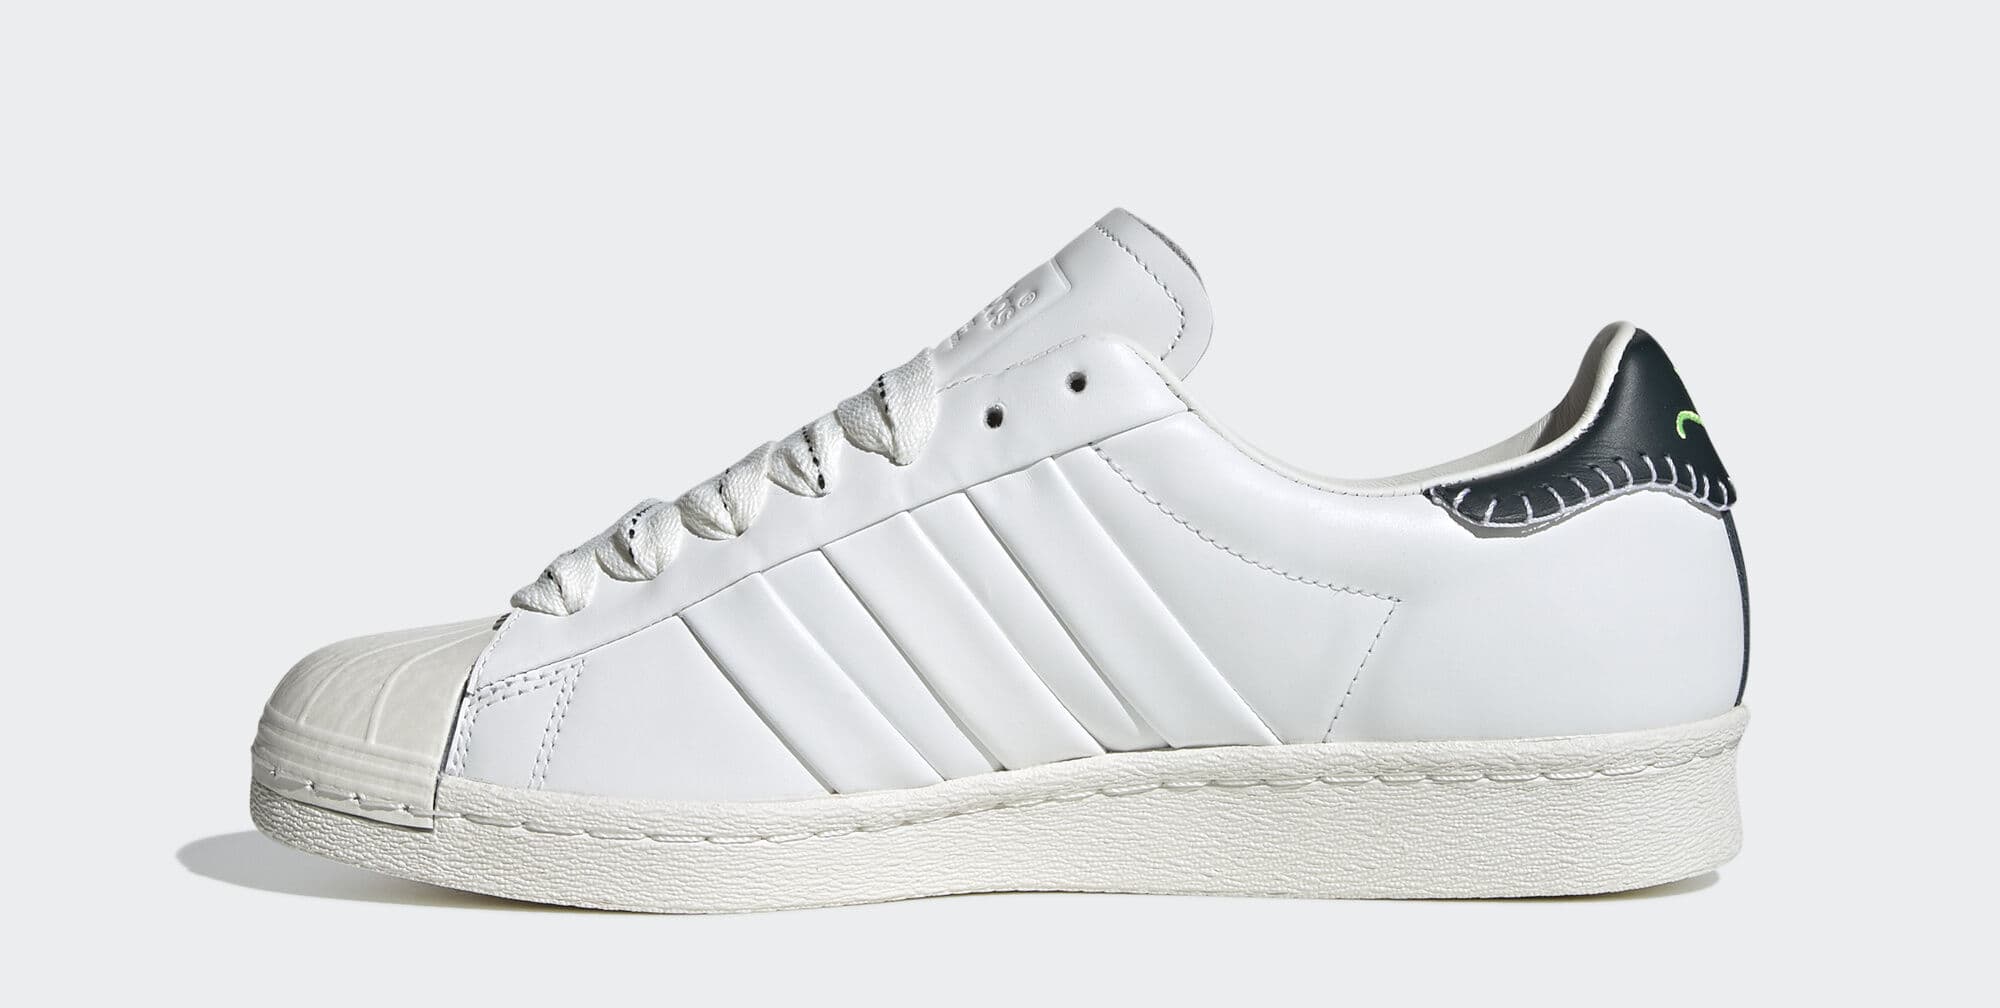 Jonah Hill x Adidas Superstar Officially Unveiled: Release Date